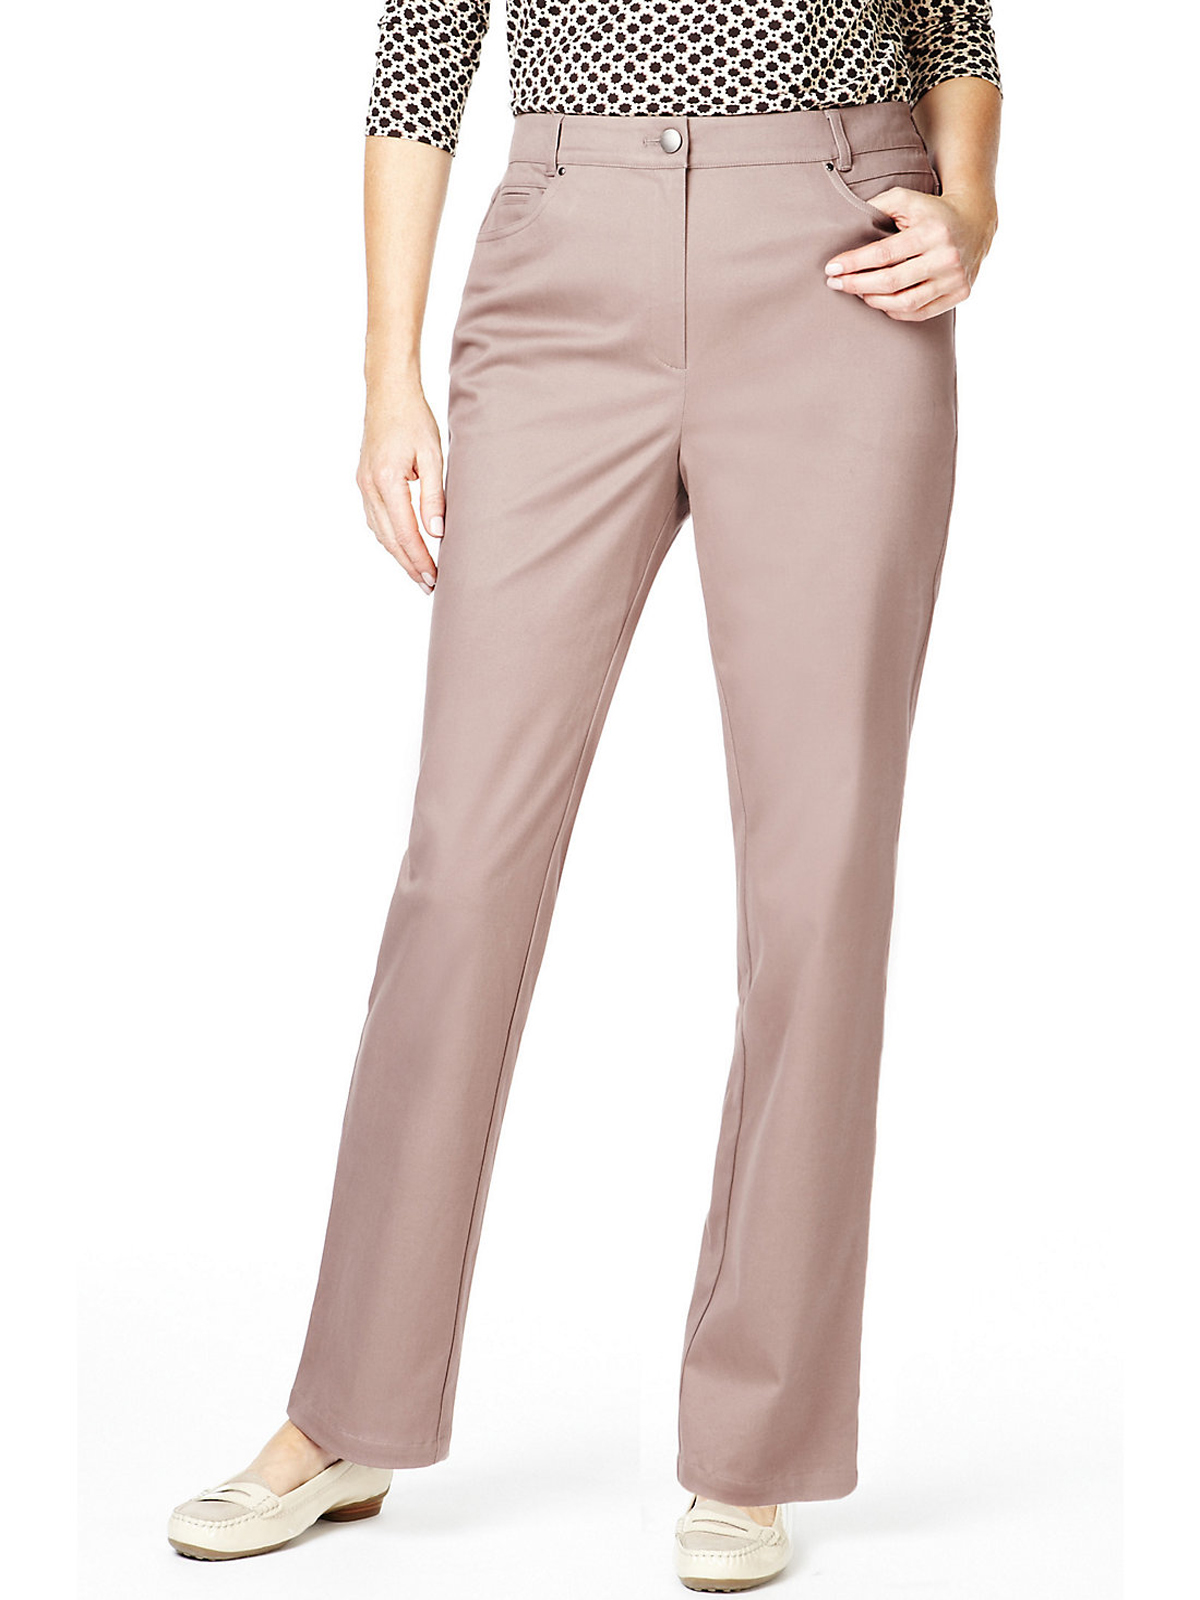 Marks and Spencer - - M&5 DARK-BEIGE Cotton Rich Straight Leg Trousers ...